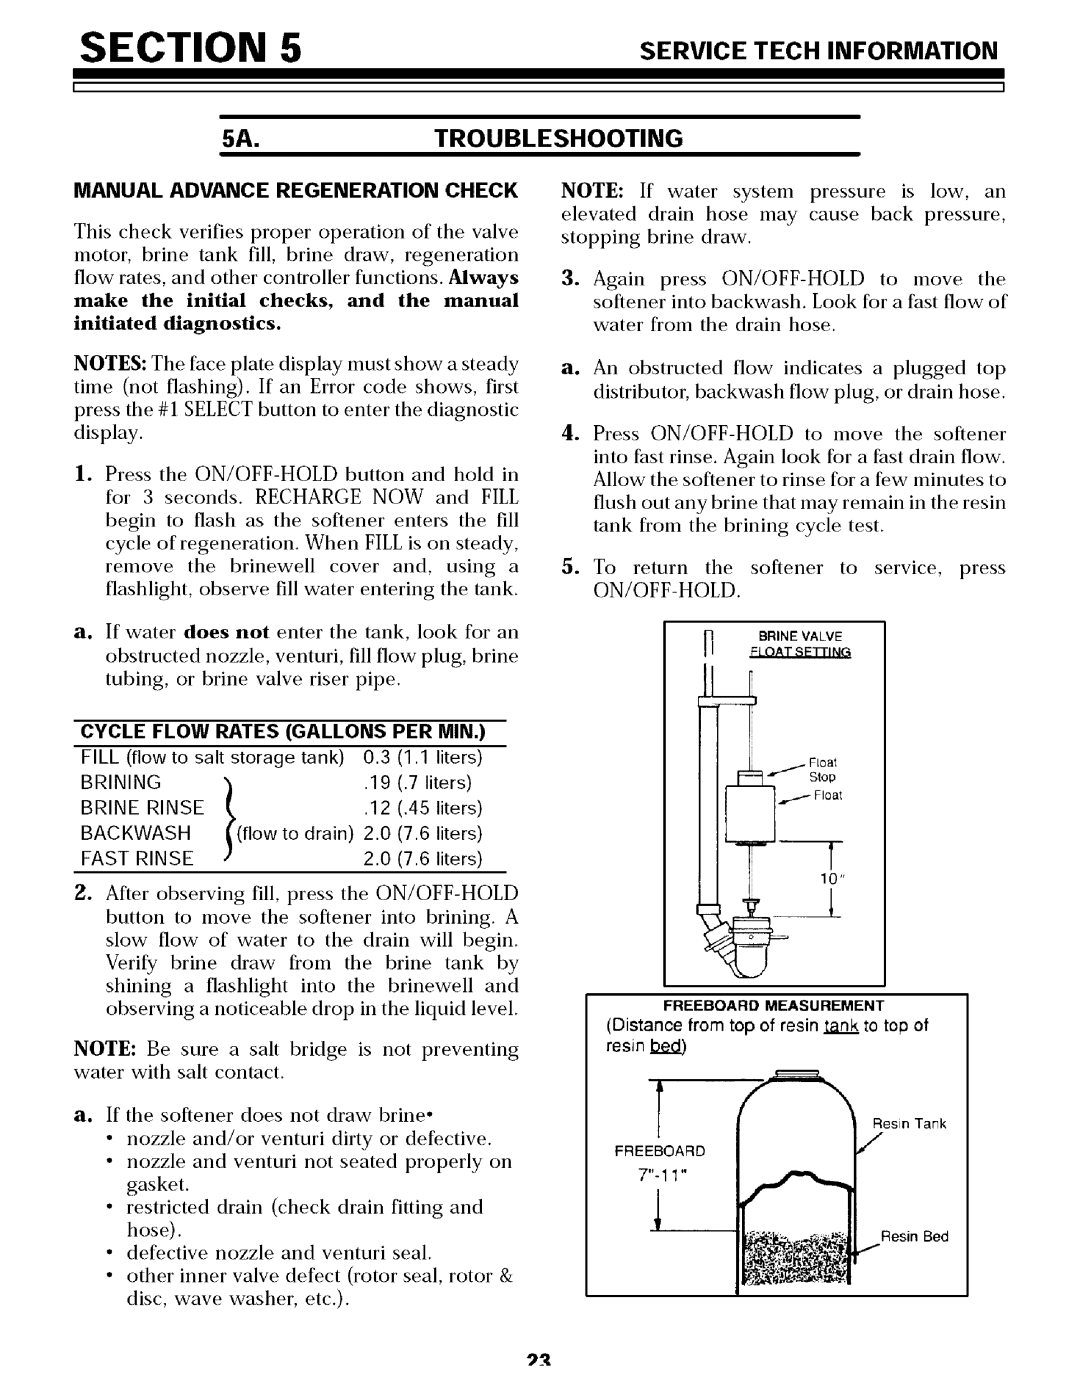 Sears 625.34855, 625.34854 owner manual Manual Advance Regeneration Check, Cycle Flow Rates Gallons PER MIN 